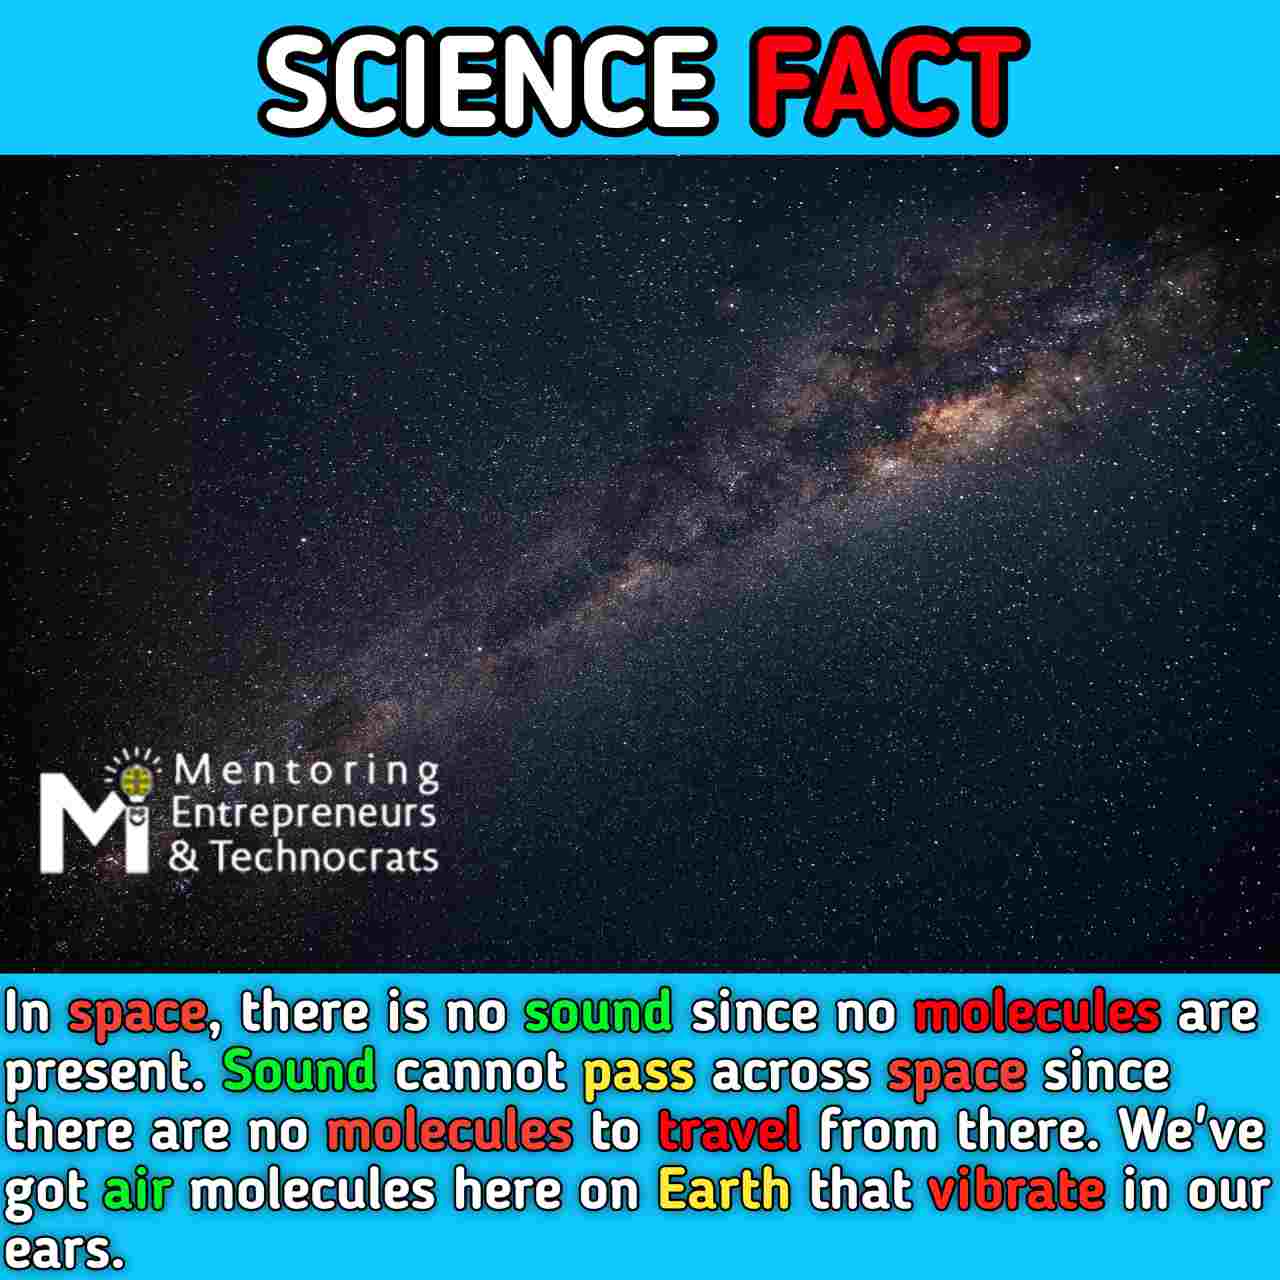 Space Science fact